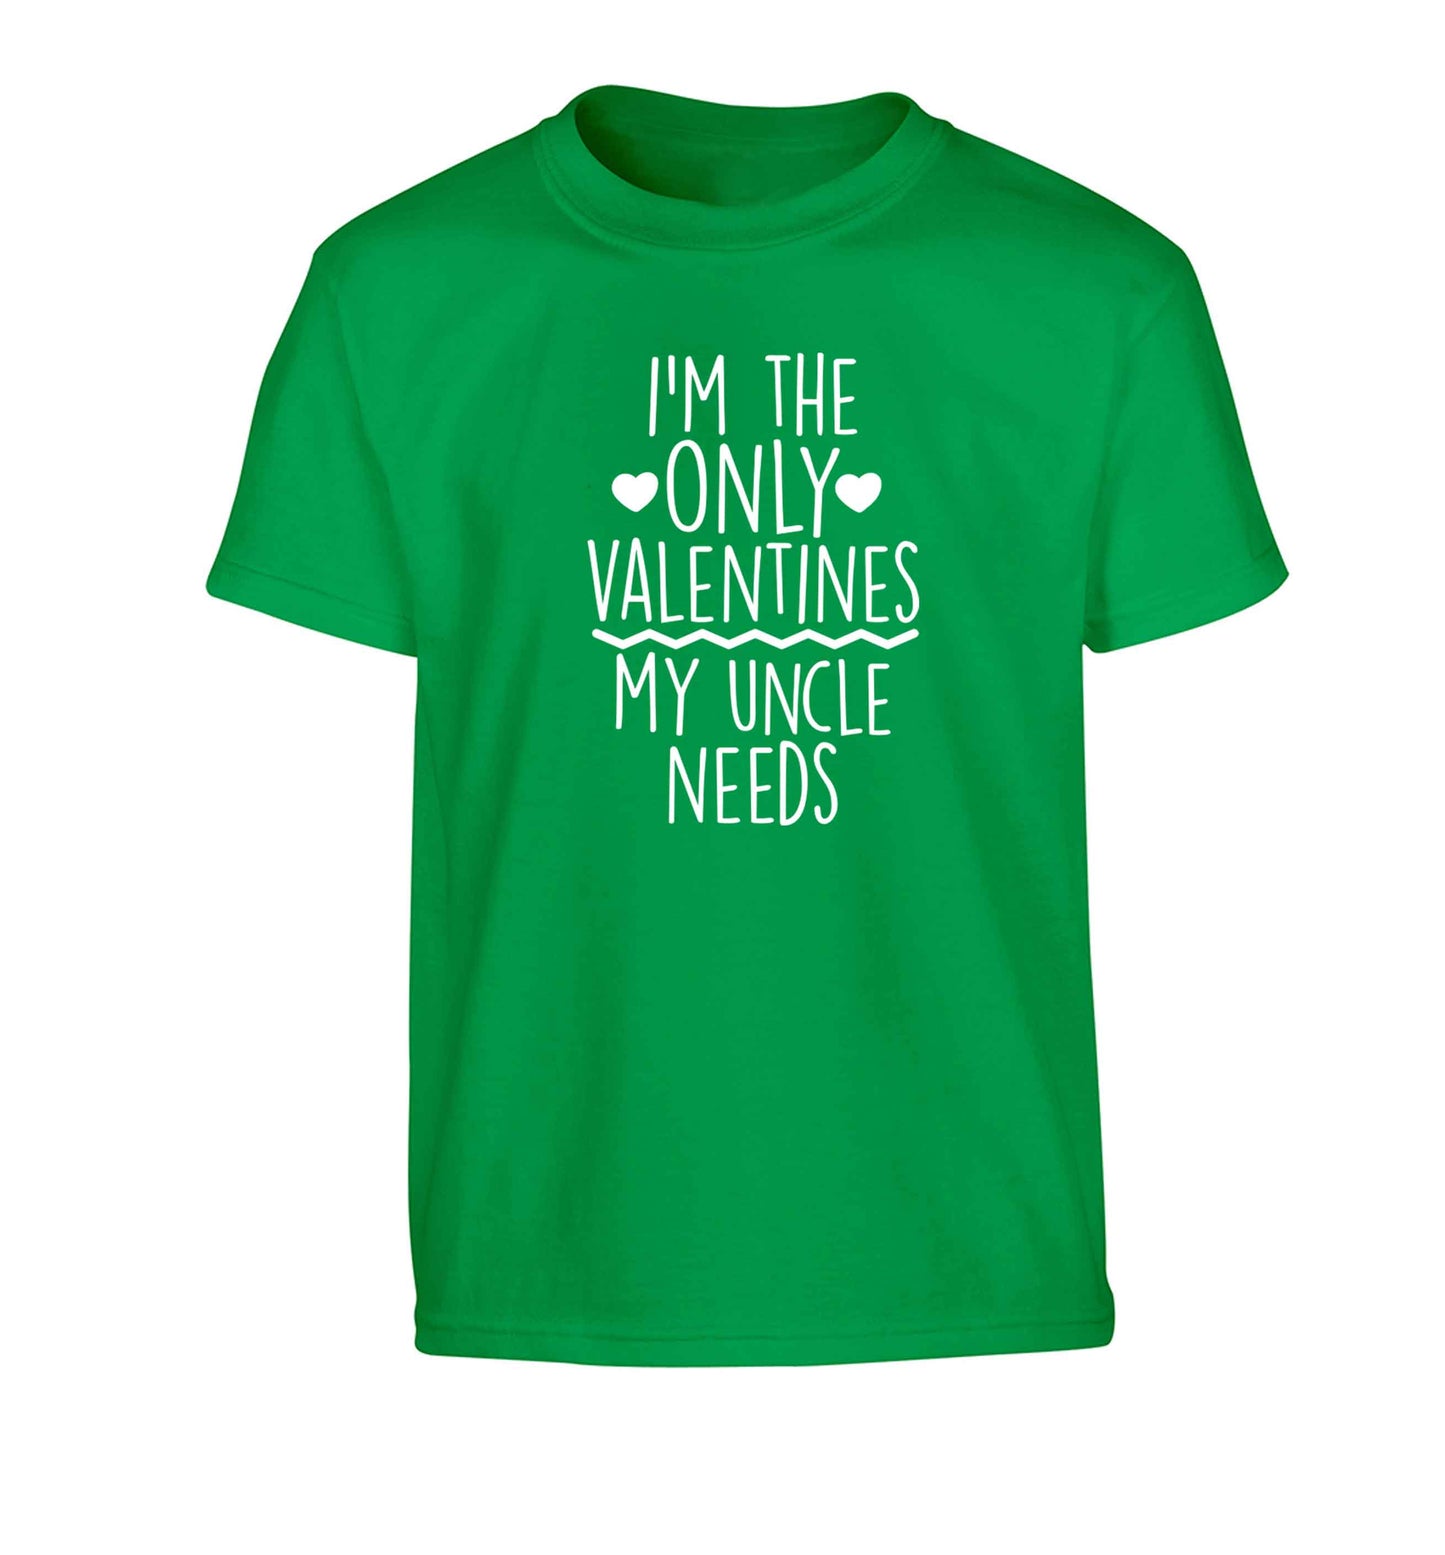 I'm the only valentines my uncle needs Children's green Tshirt 12-13 Years